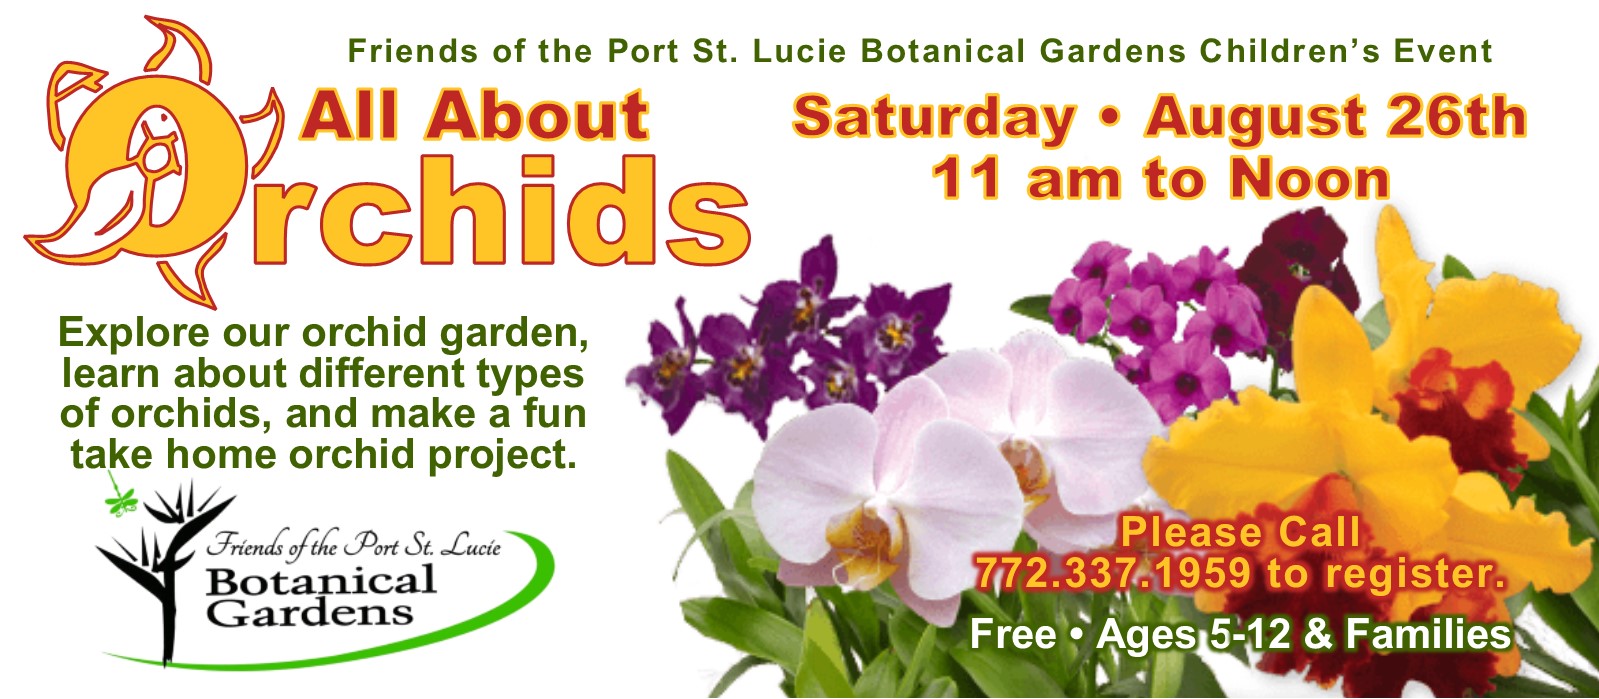 Children's Event: All About Orchids